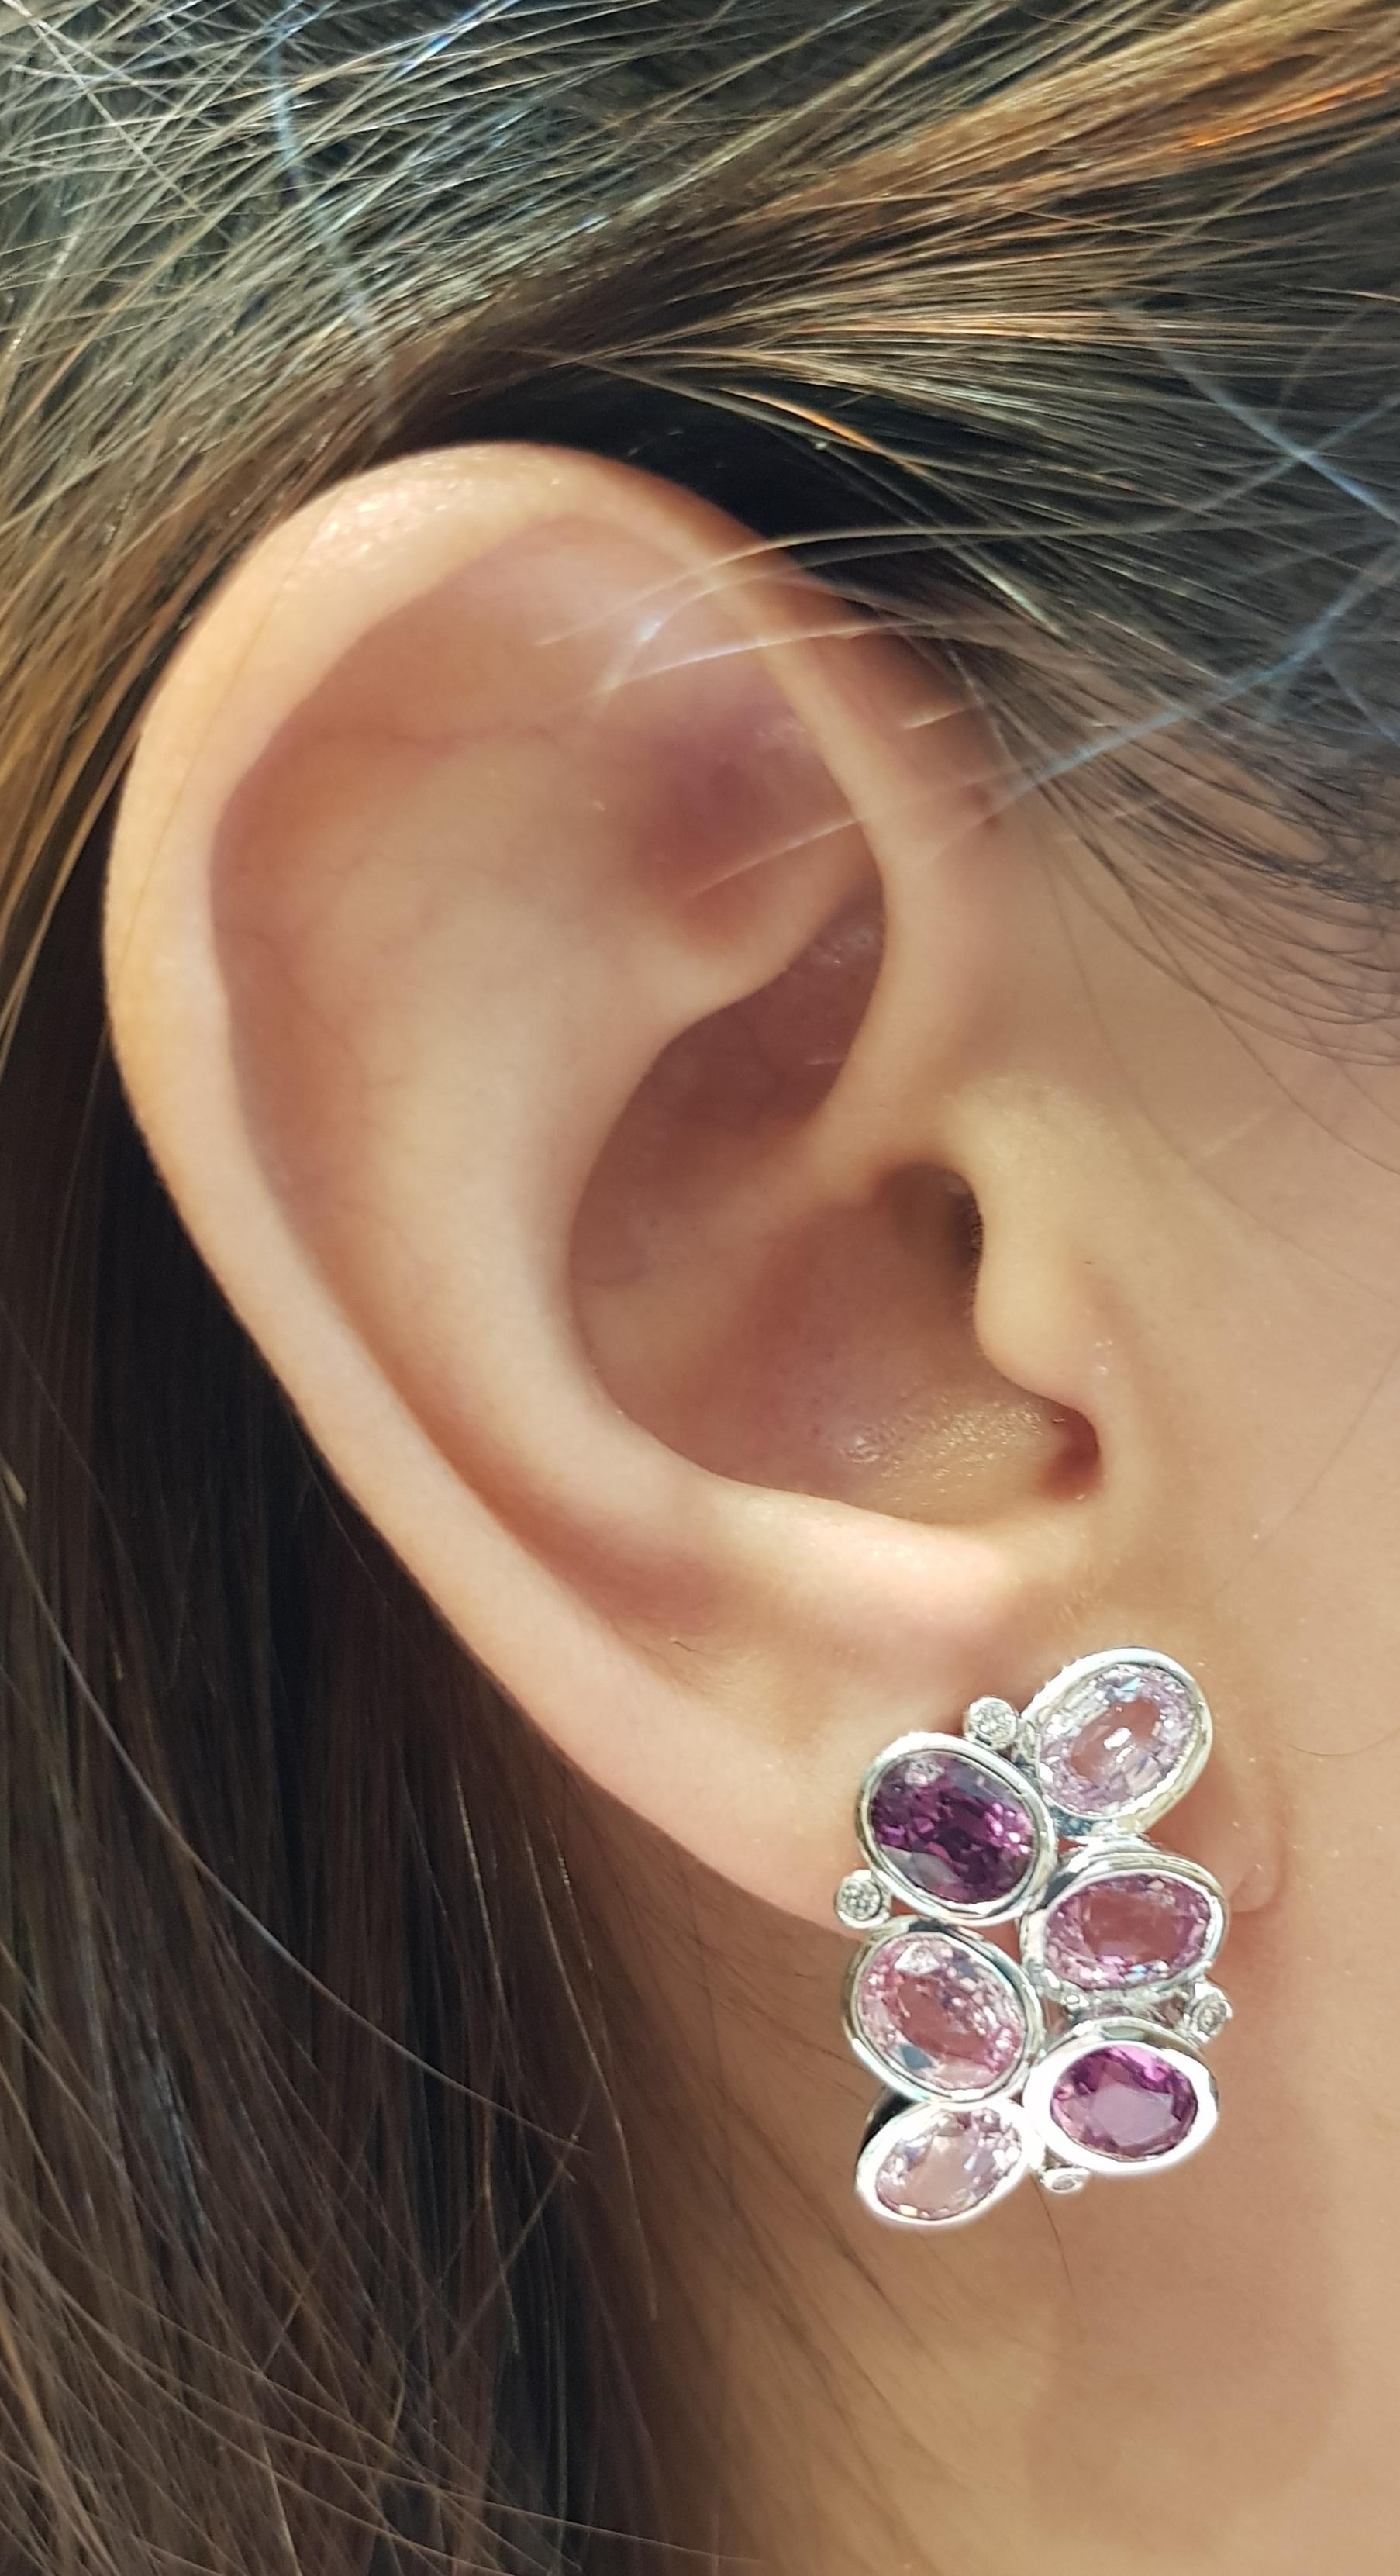 Pink Sapphire 13.48 carats with Diamond 0.12 carat Earrings set in 18 Karat White Gold Settings

Width:  1.5 cm 
Length:  2.4 cm
Total Weight: 12.77 grams

